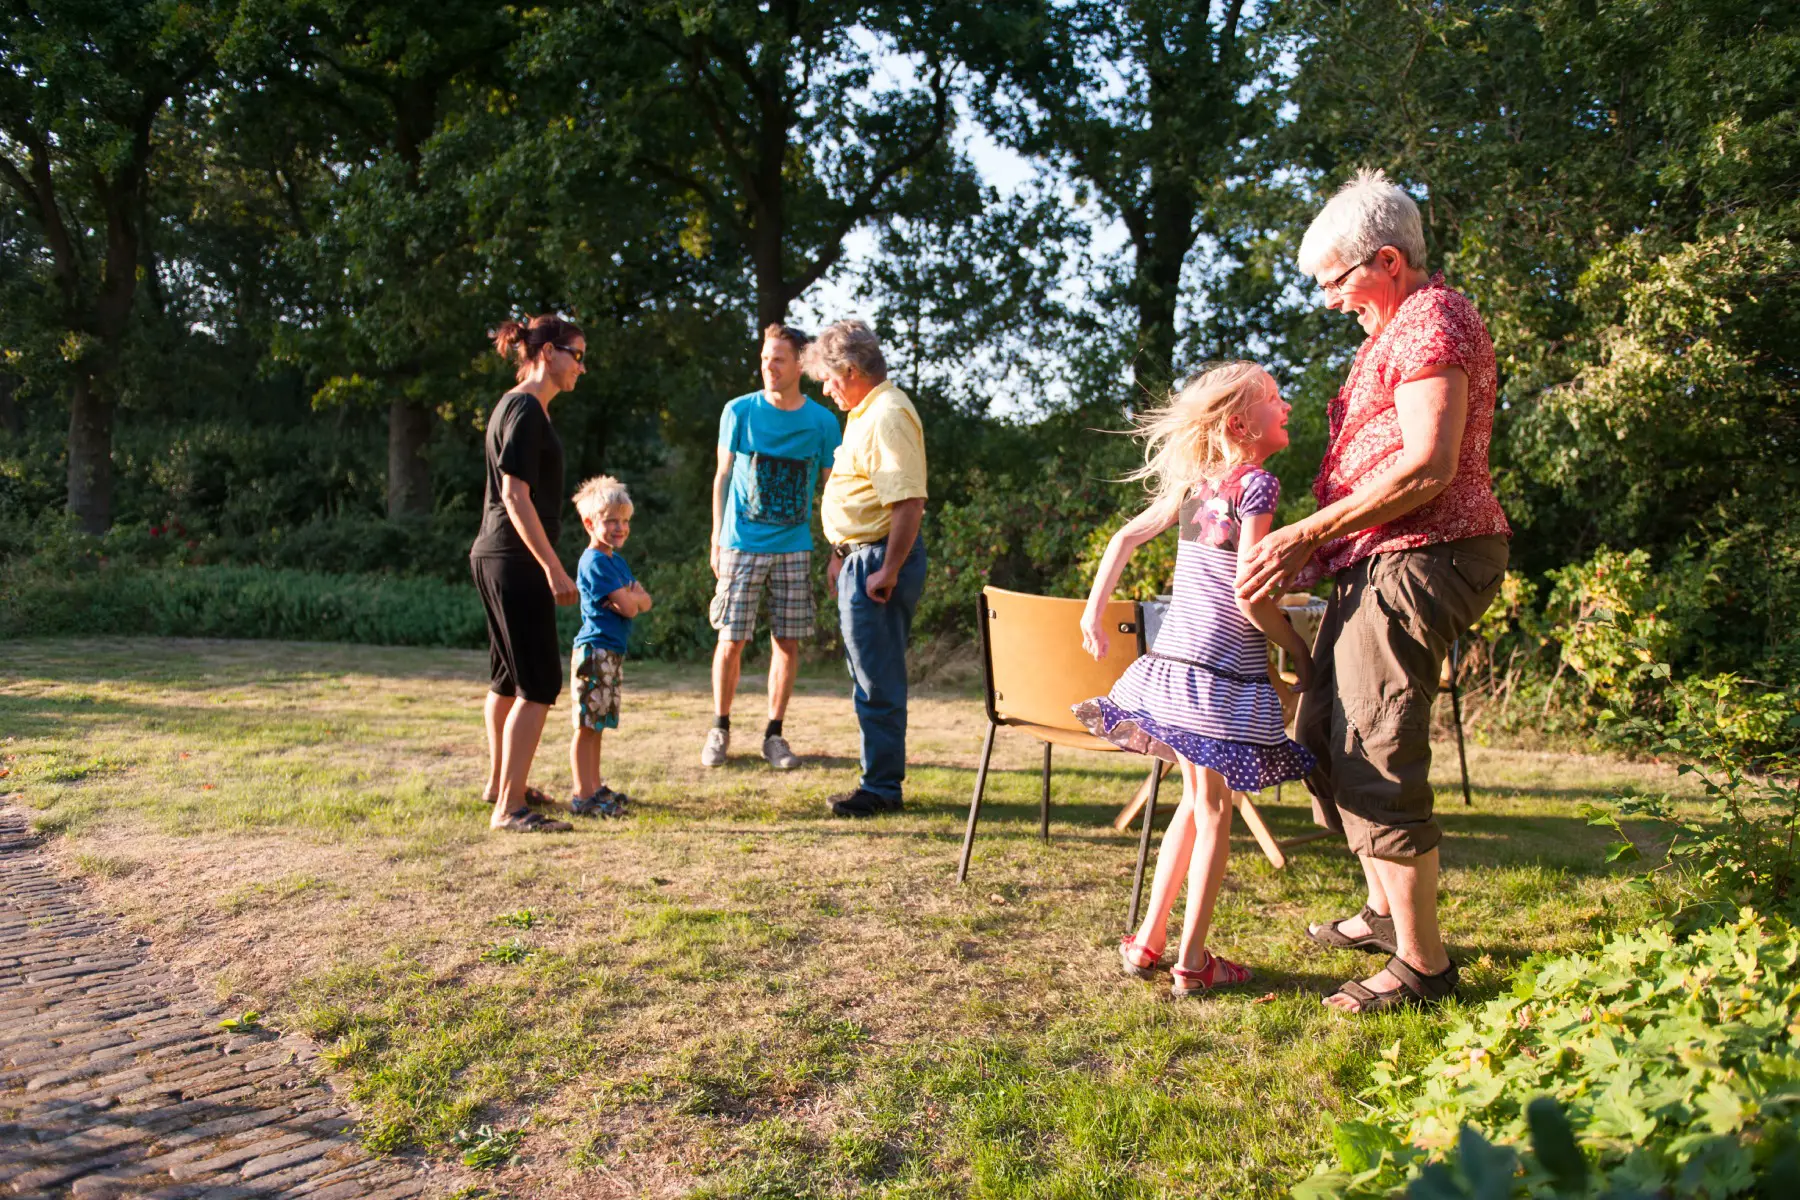 Grandparents and grandchildren reuniting for picnic in park